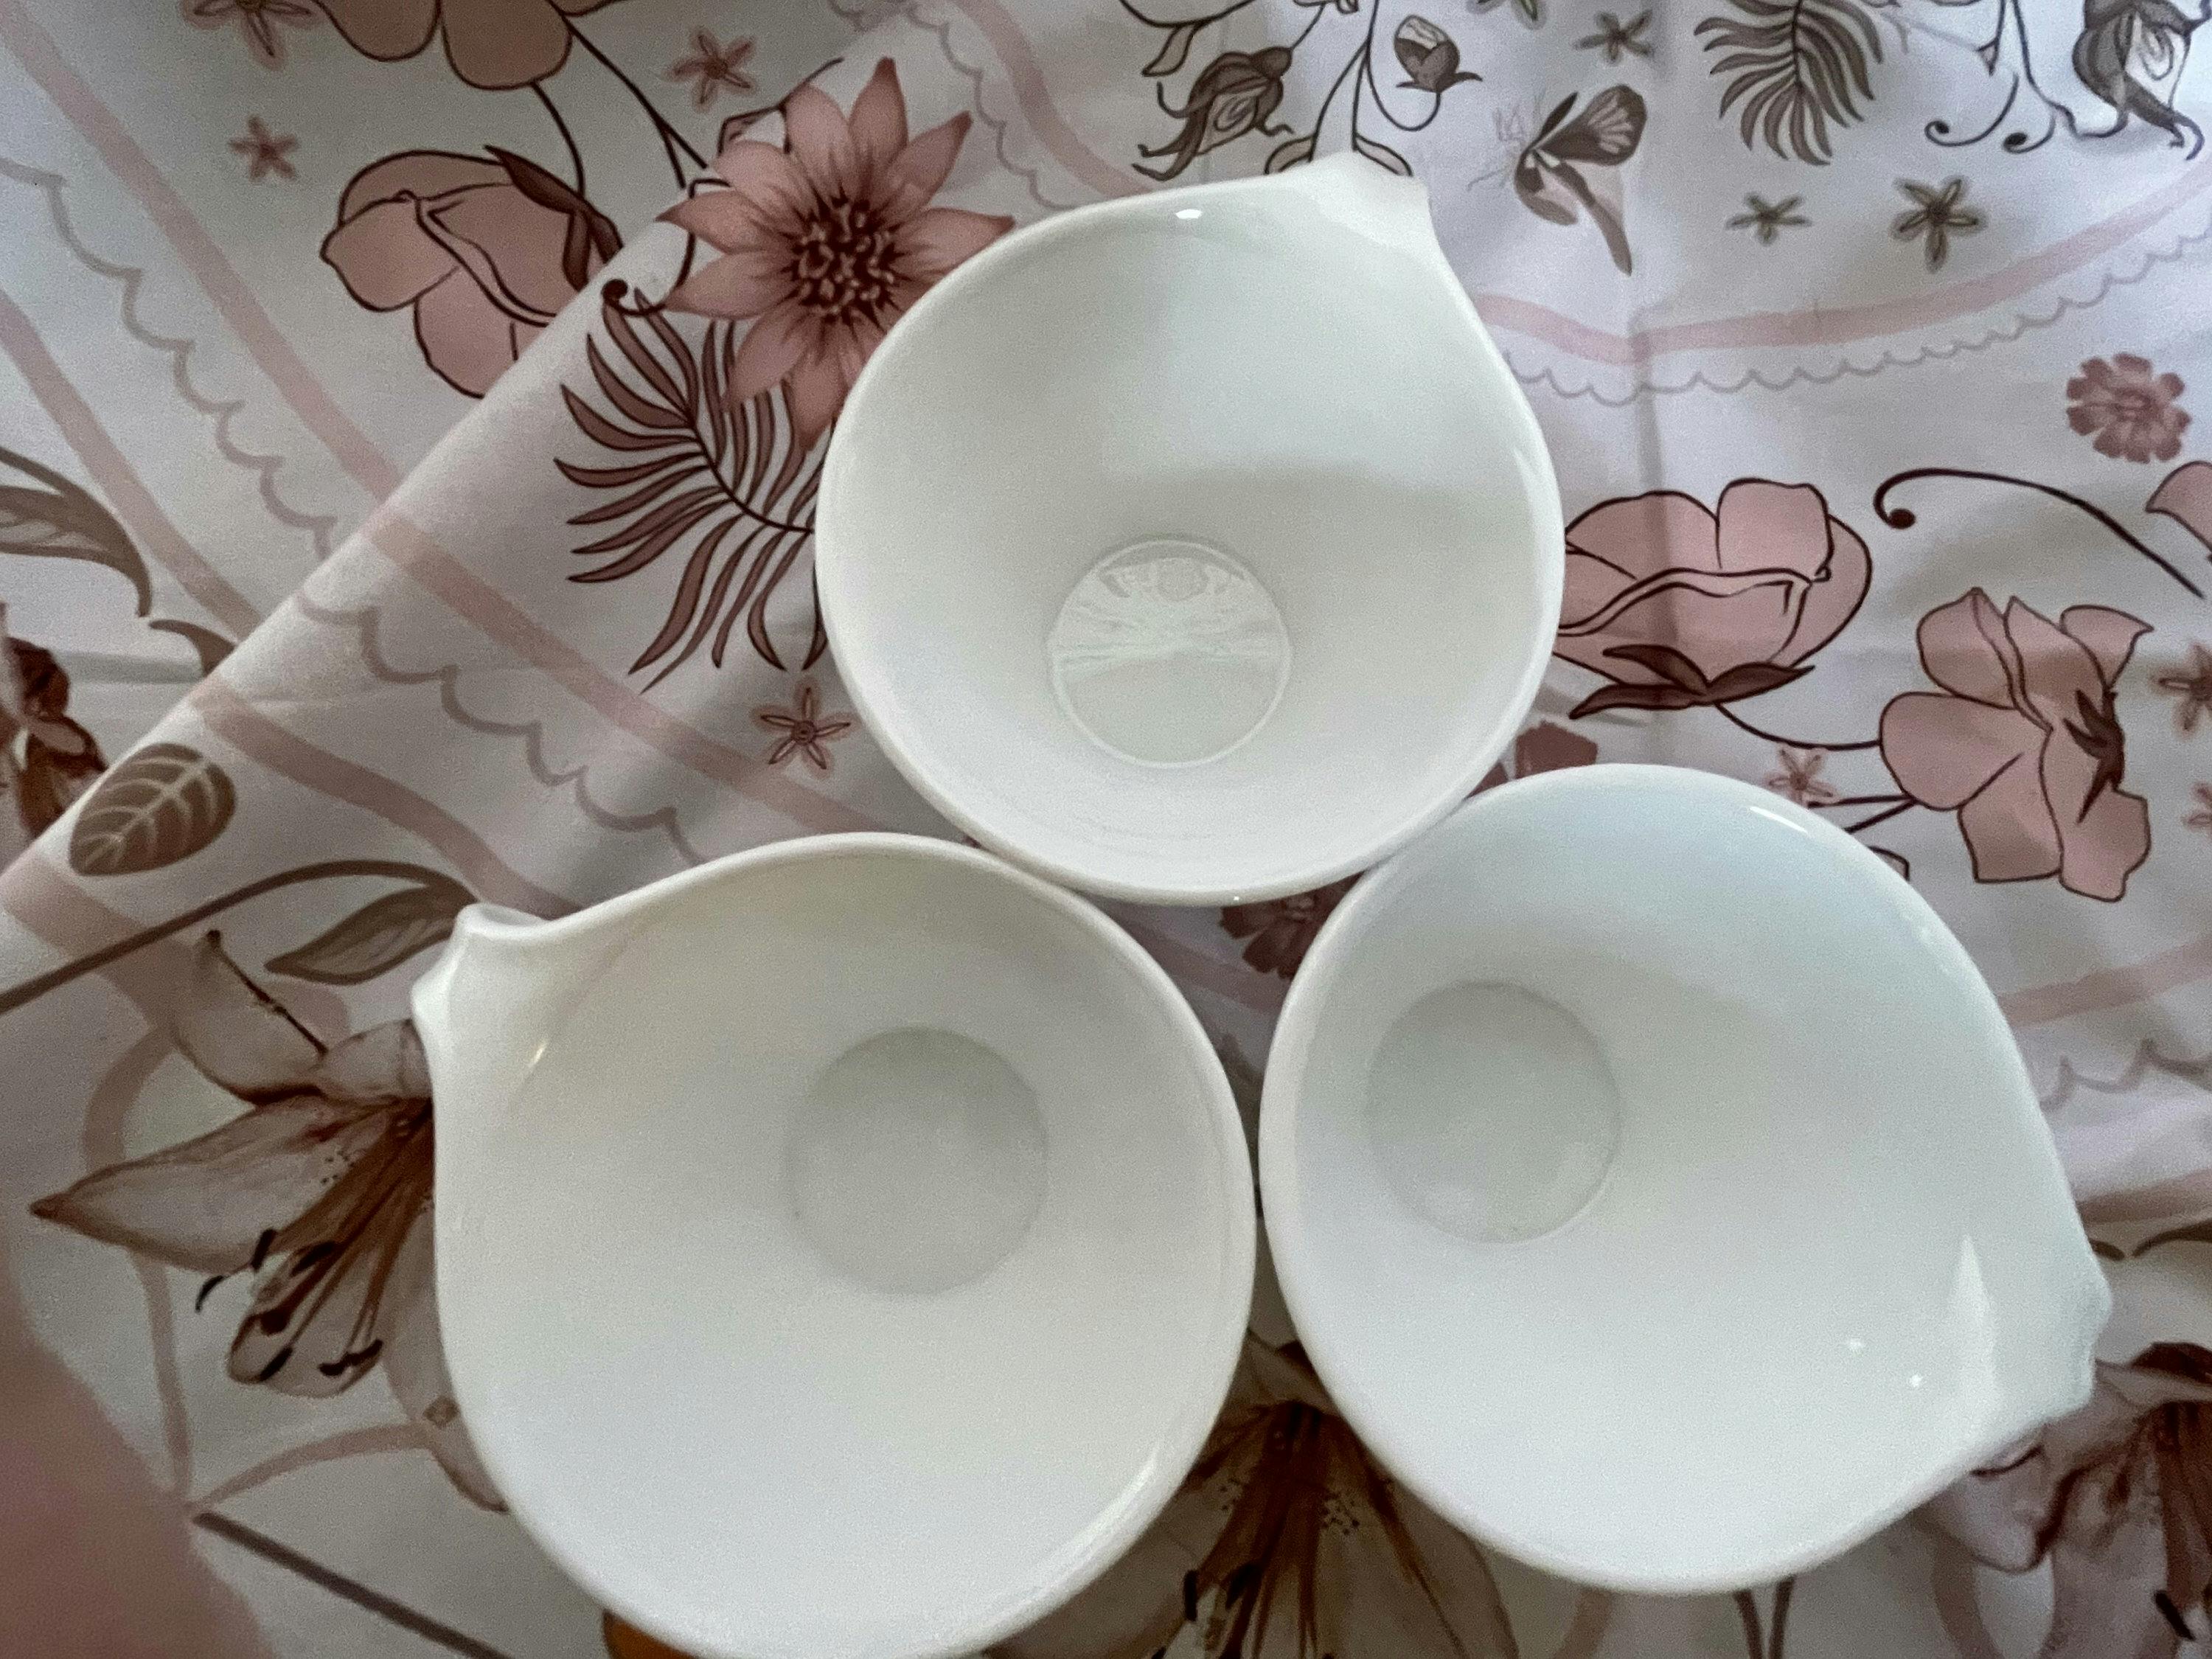 Top of white tea cups